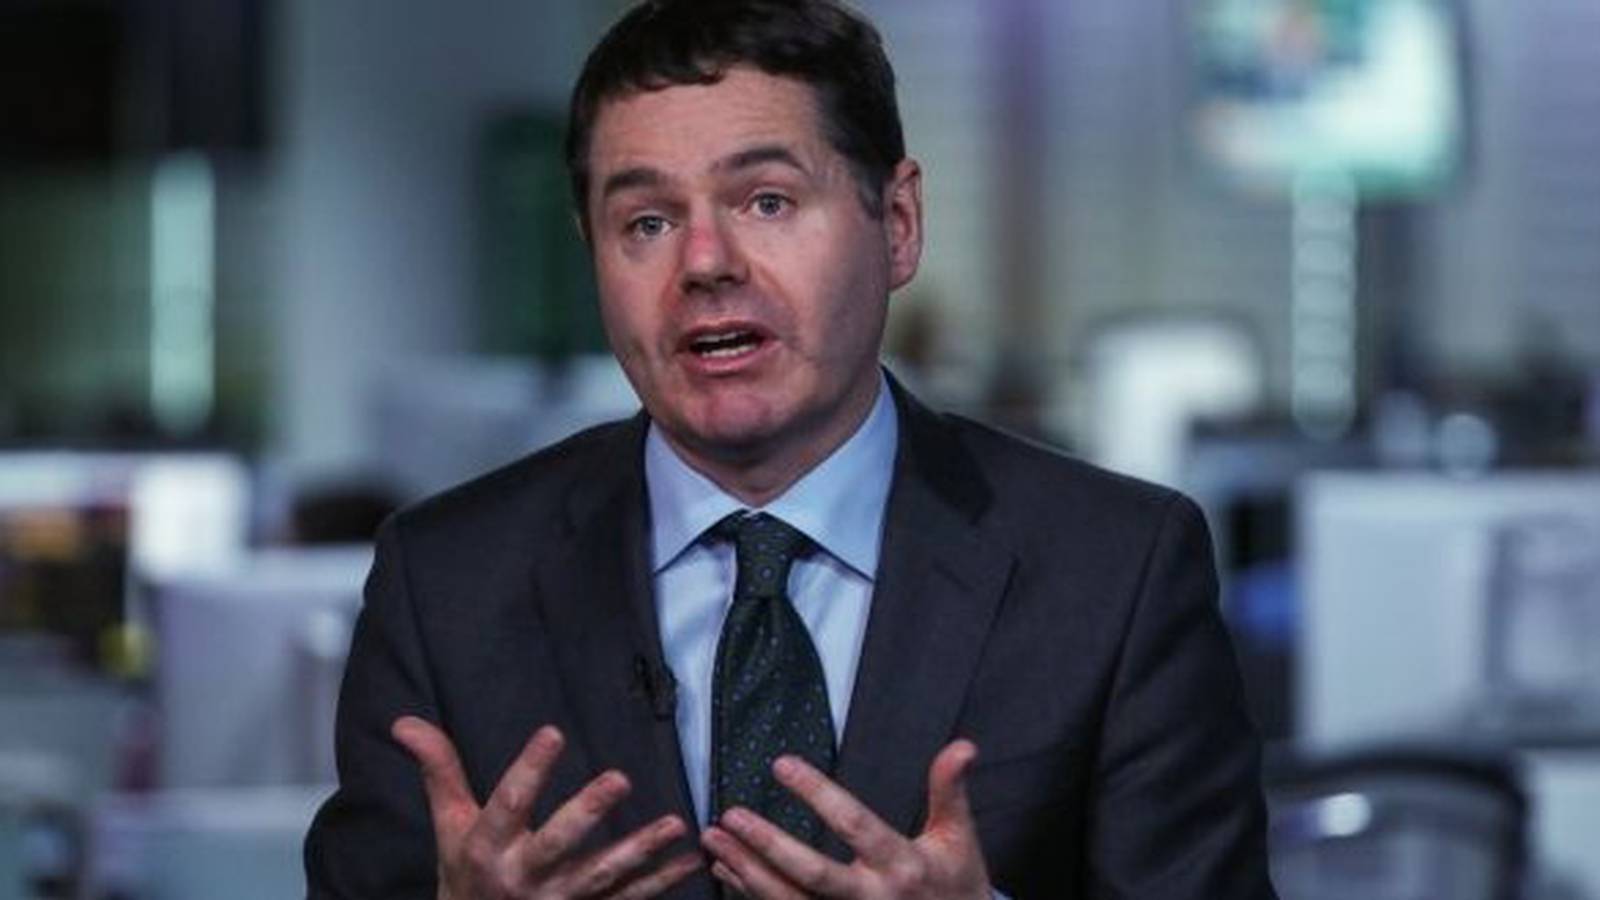 donohoe-says-water-refunds-will-not-affect-public-services-the-irish